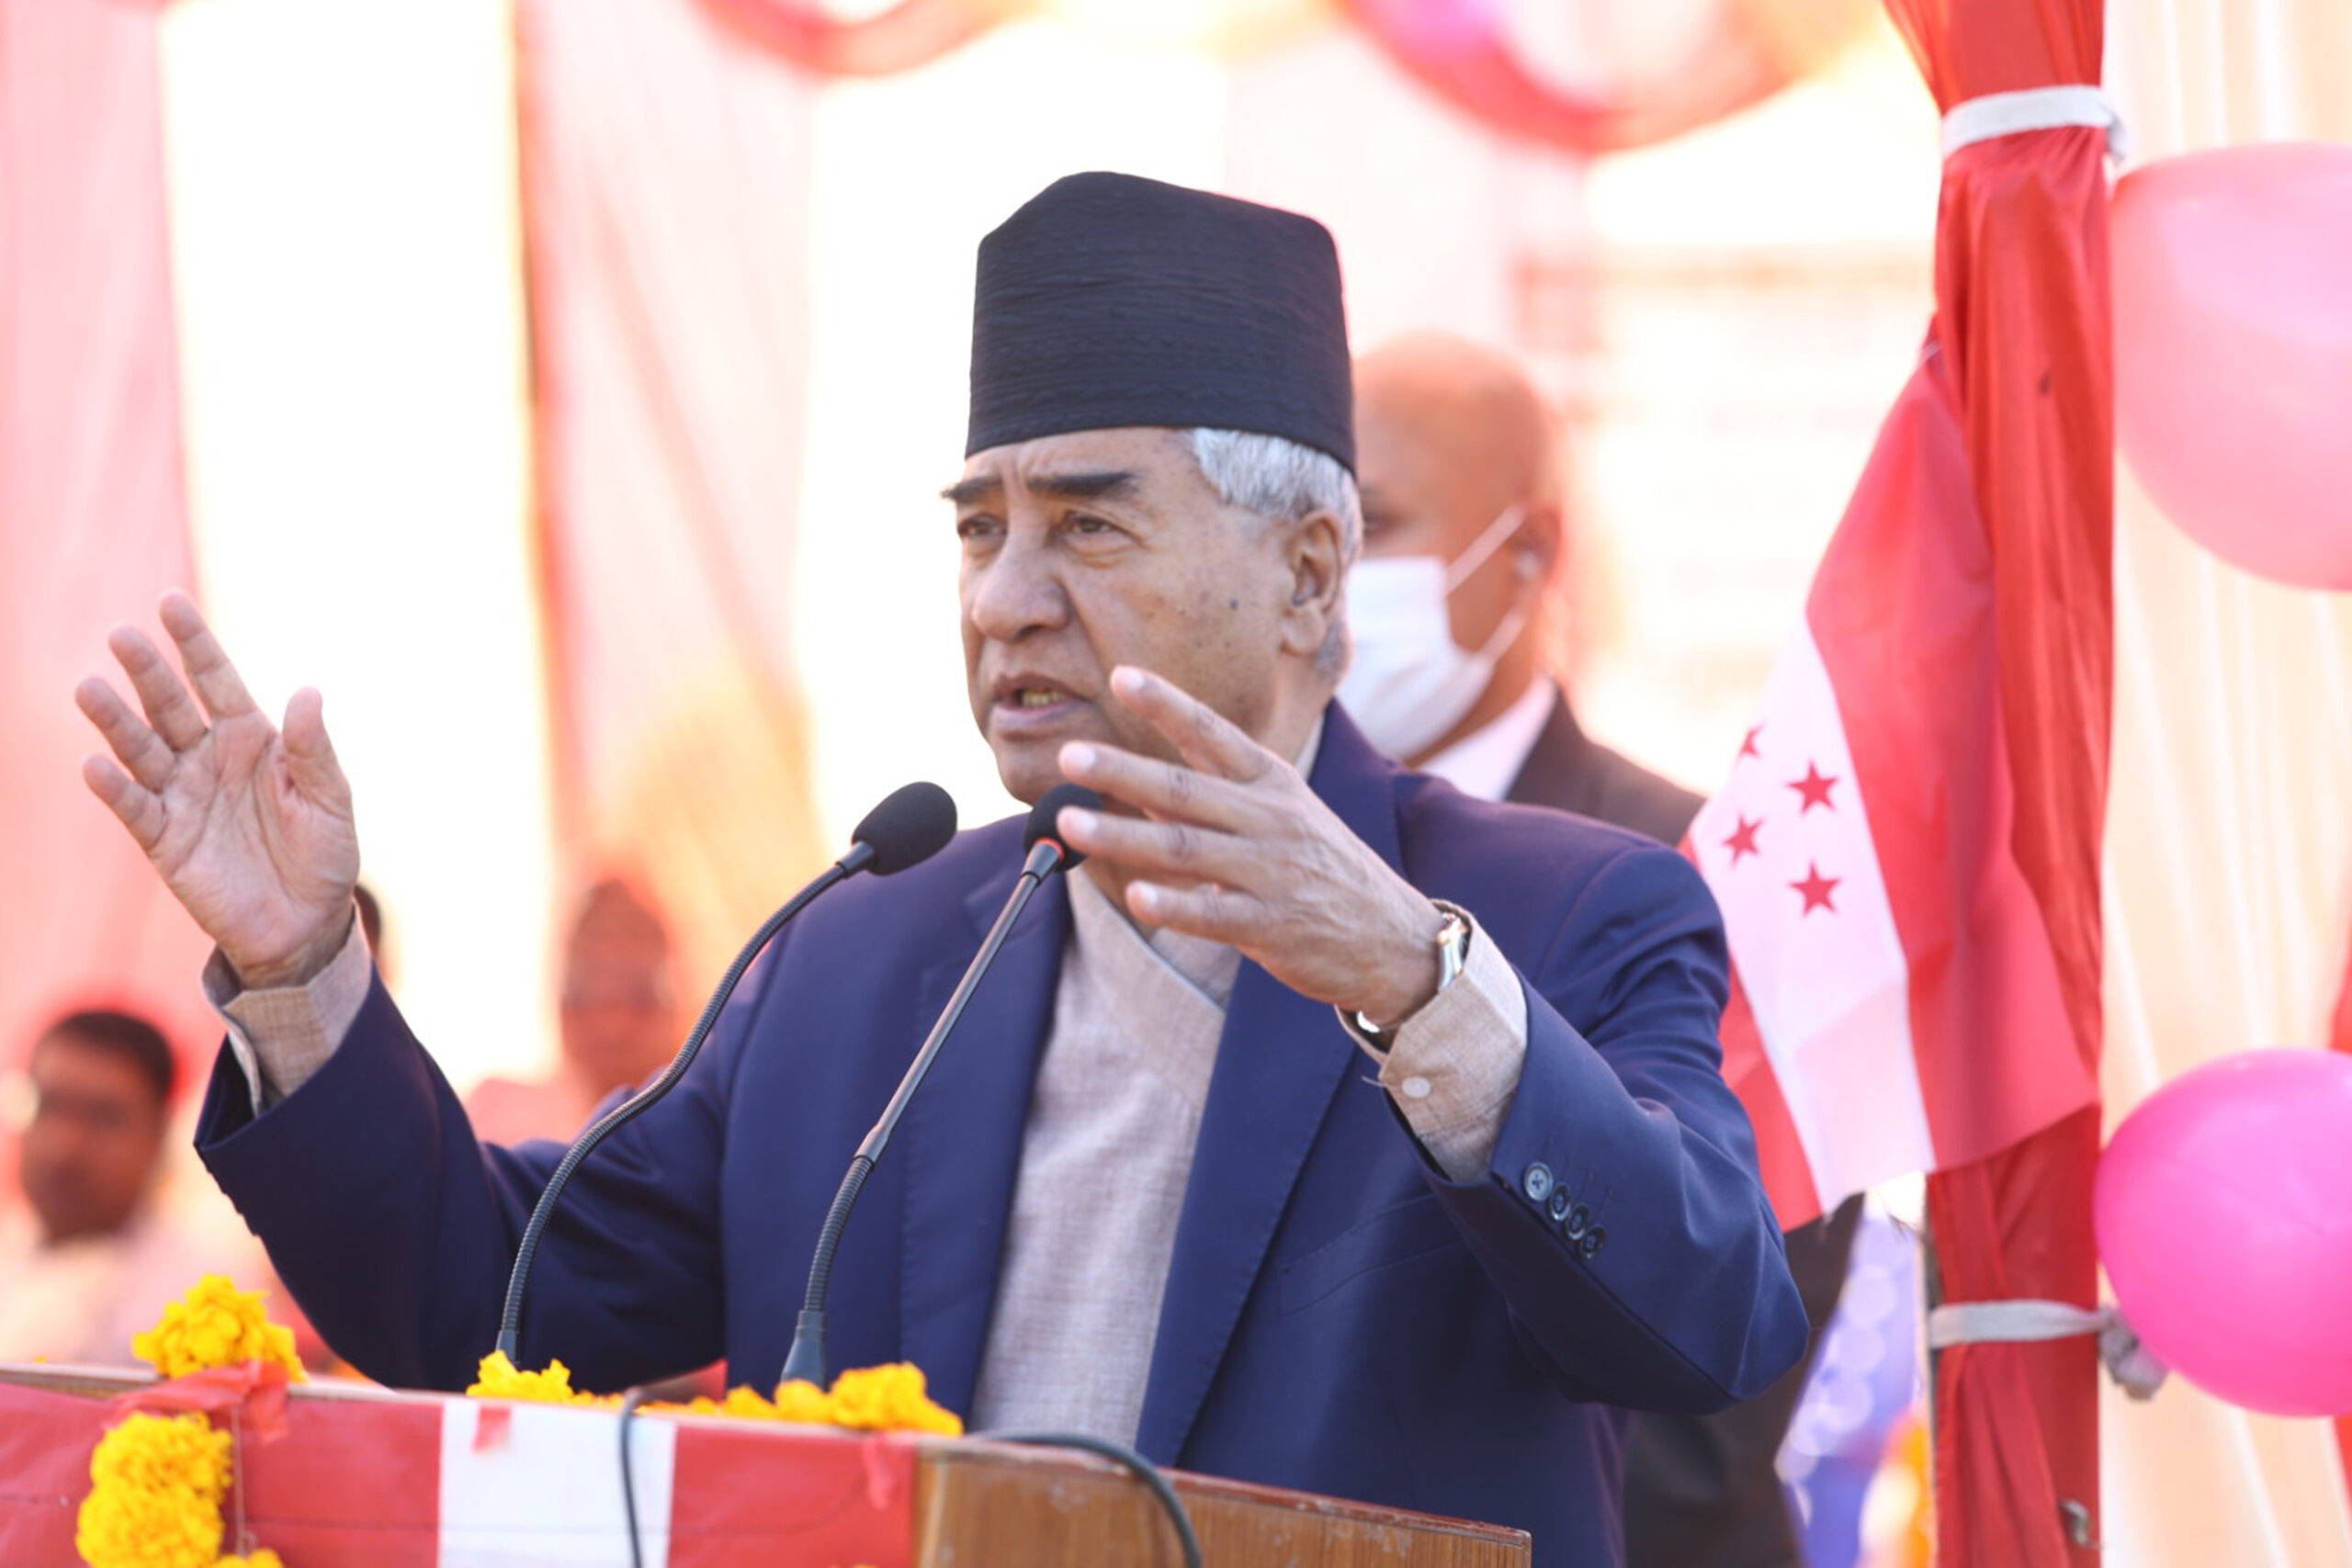 All religions and cultures get equal opportunity in democracy: Deuba